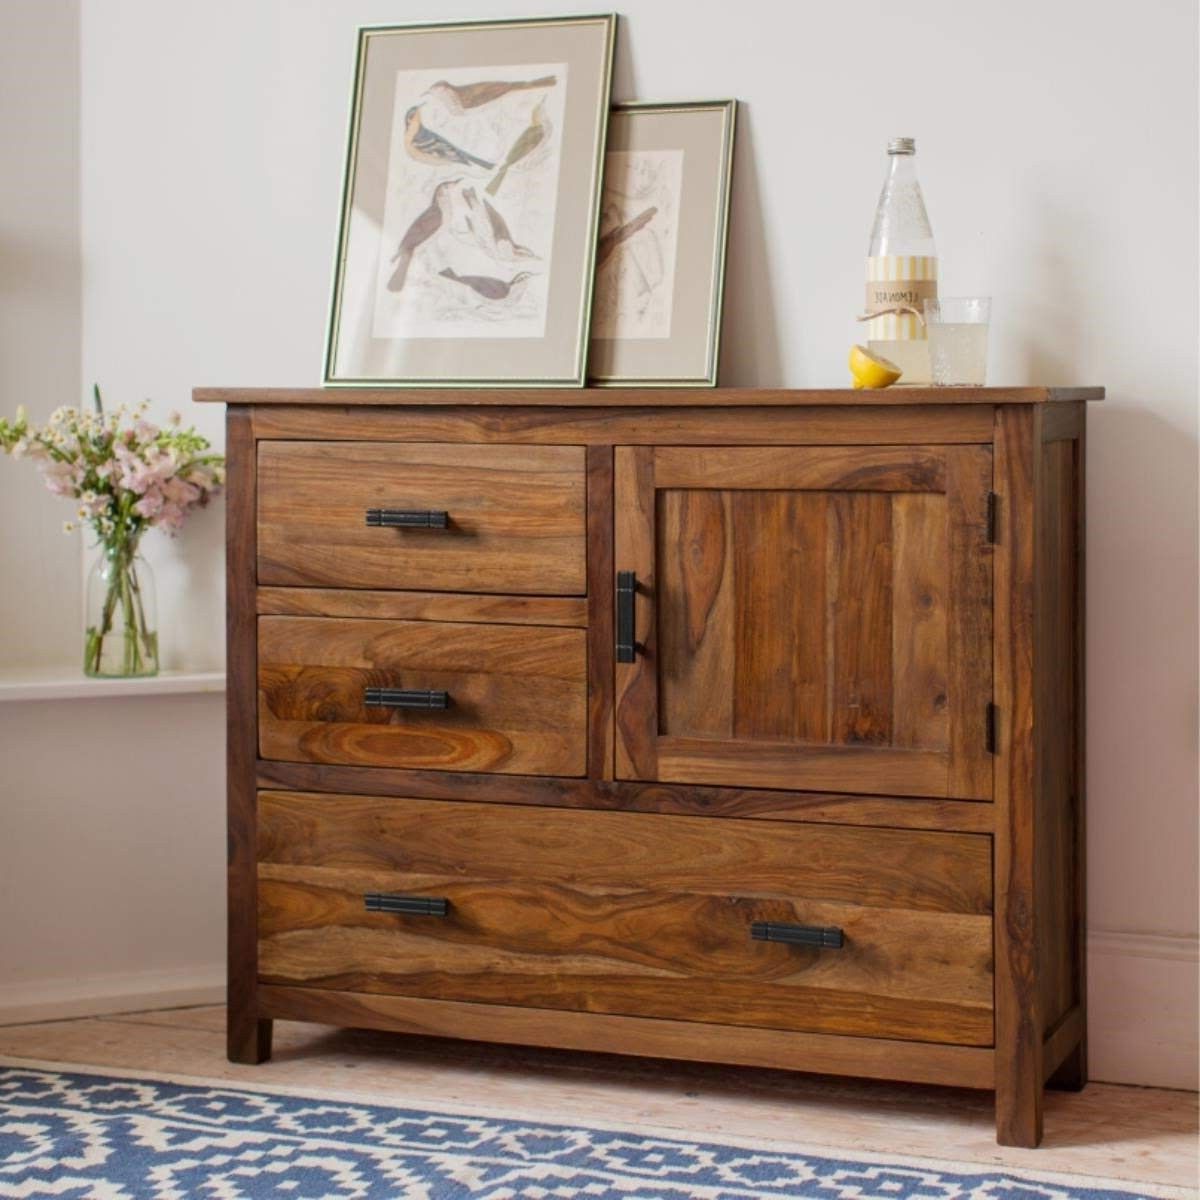 Jett Sheesham Wood Sideboard Cabinet For Living Room Furniture 3 Drawers 1 Cabinet  Storage Natural Honey Finish – Shagun Arts With Wood Cabinet With Drawers (Gallery 6 of 20)